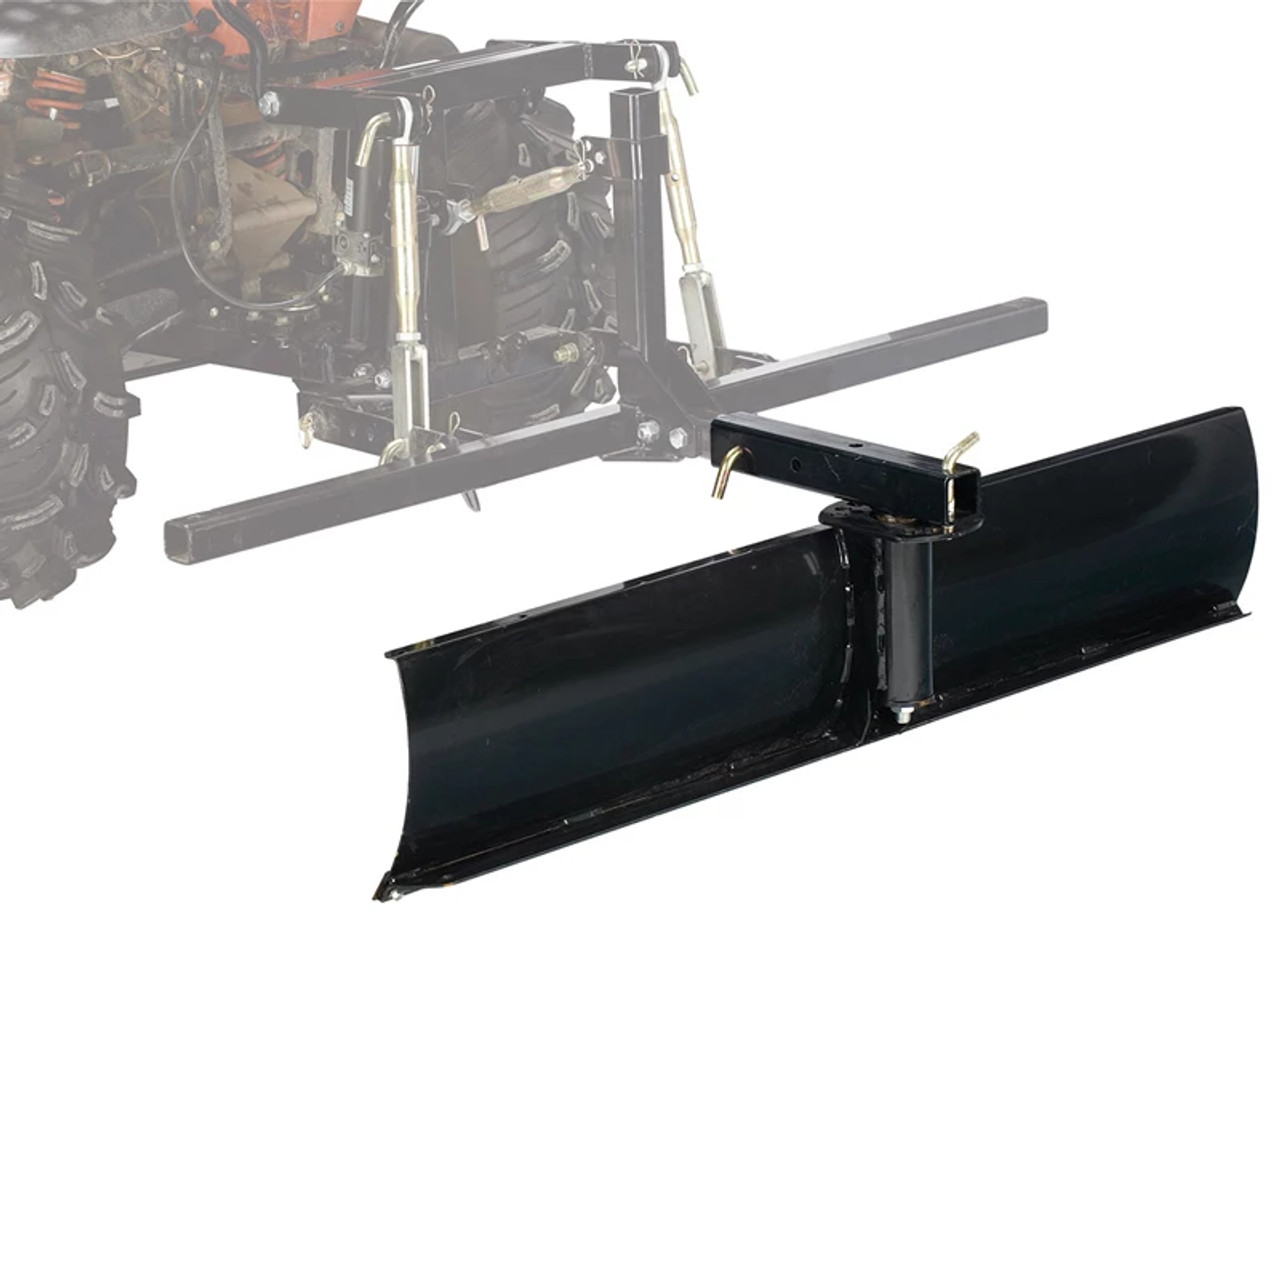 48" Rear Plow Blade  Tool Attachment